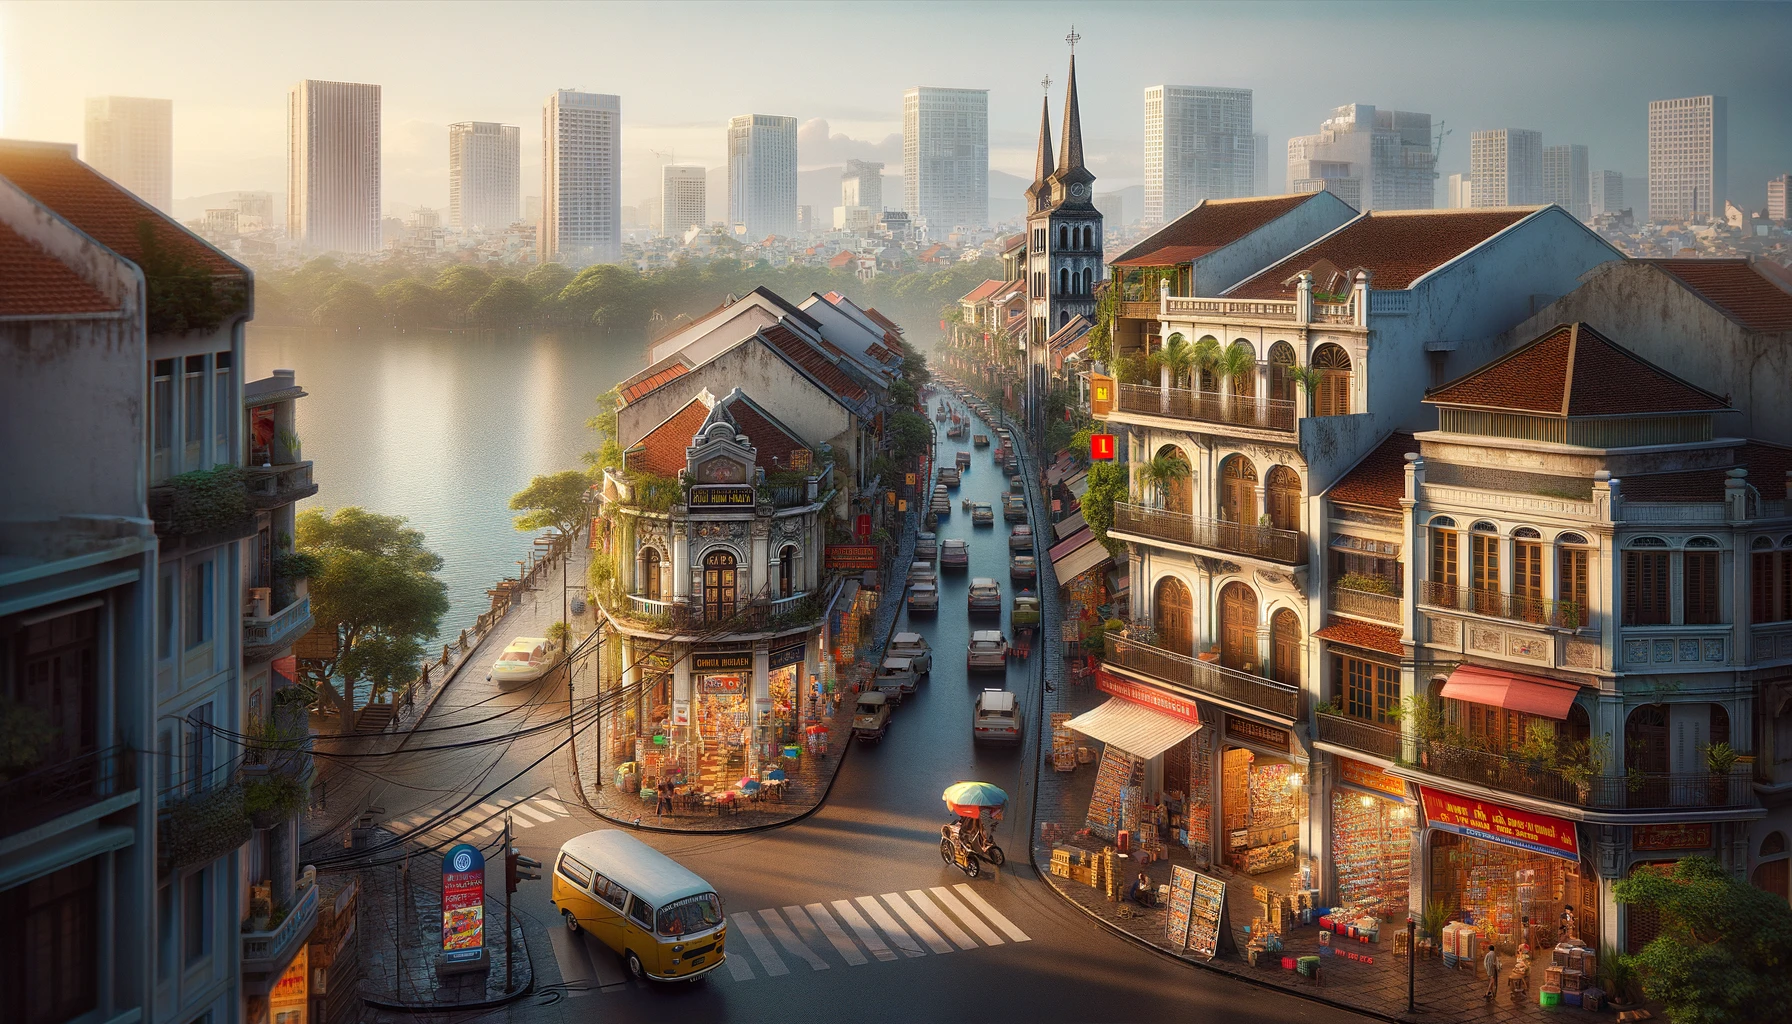 <p>Hanoi, the capital of Vietnam, offers an affordable lifestyle with a rich cultural heritage. The city’s fascinating blend of French and Asian influences, along with its low living costs, makes it an attractive destination for budget-conscious individuals.</p>